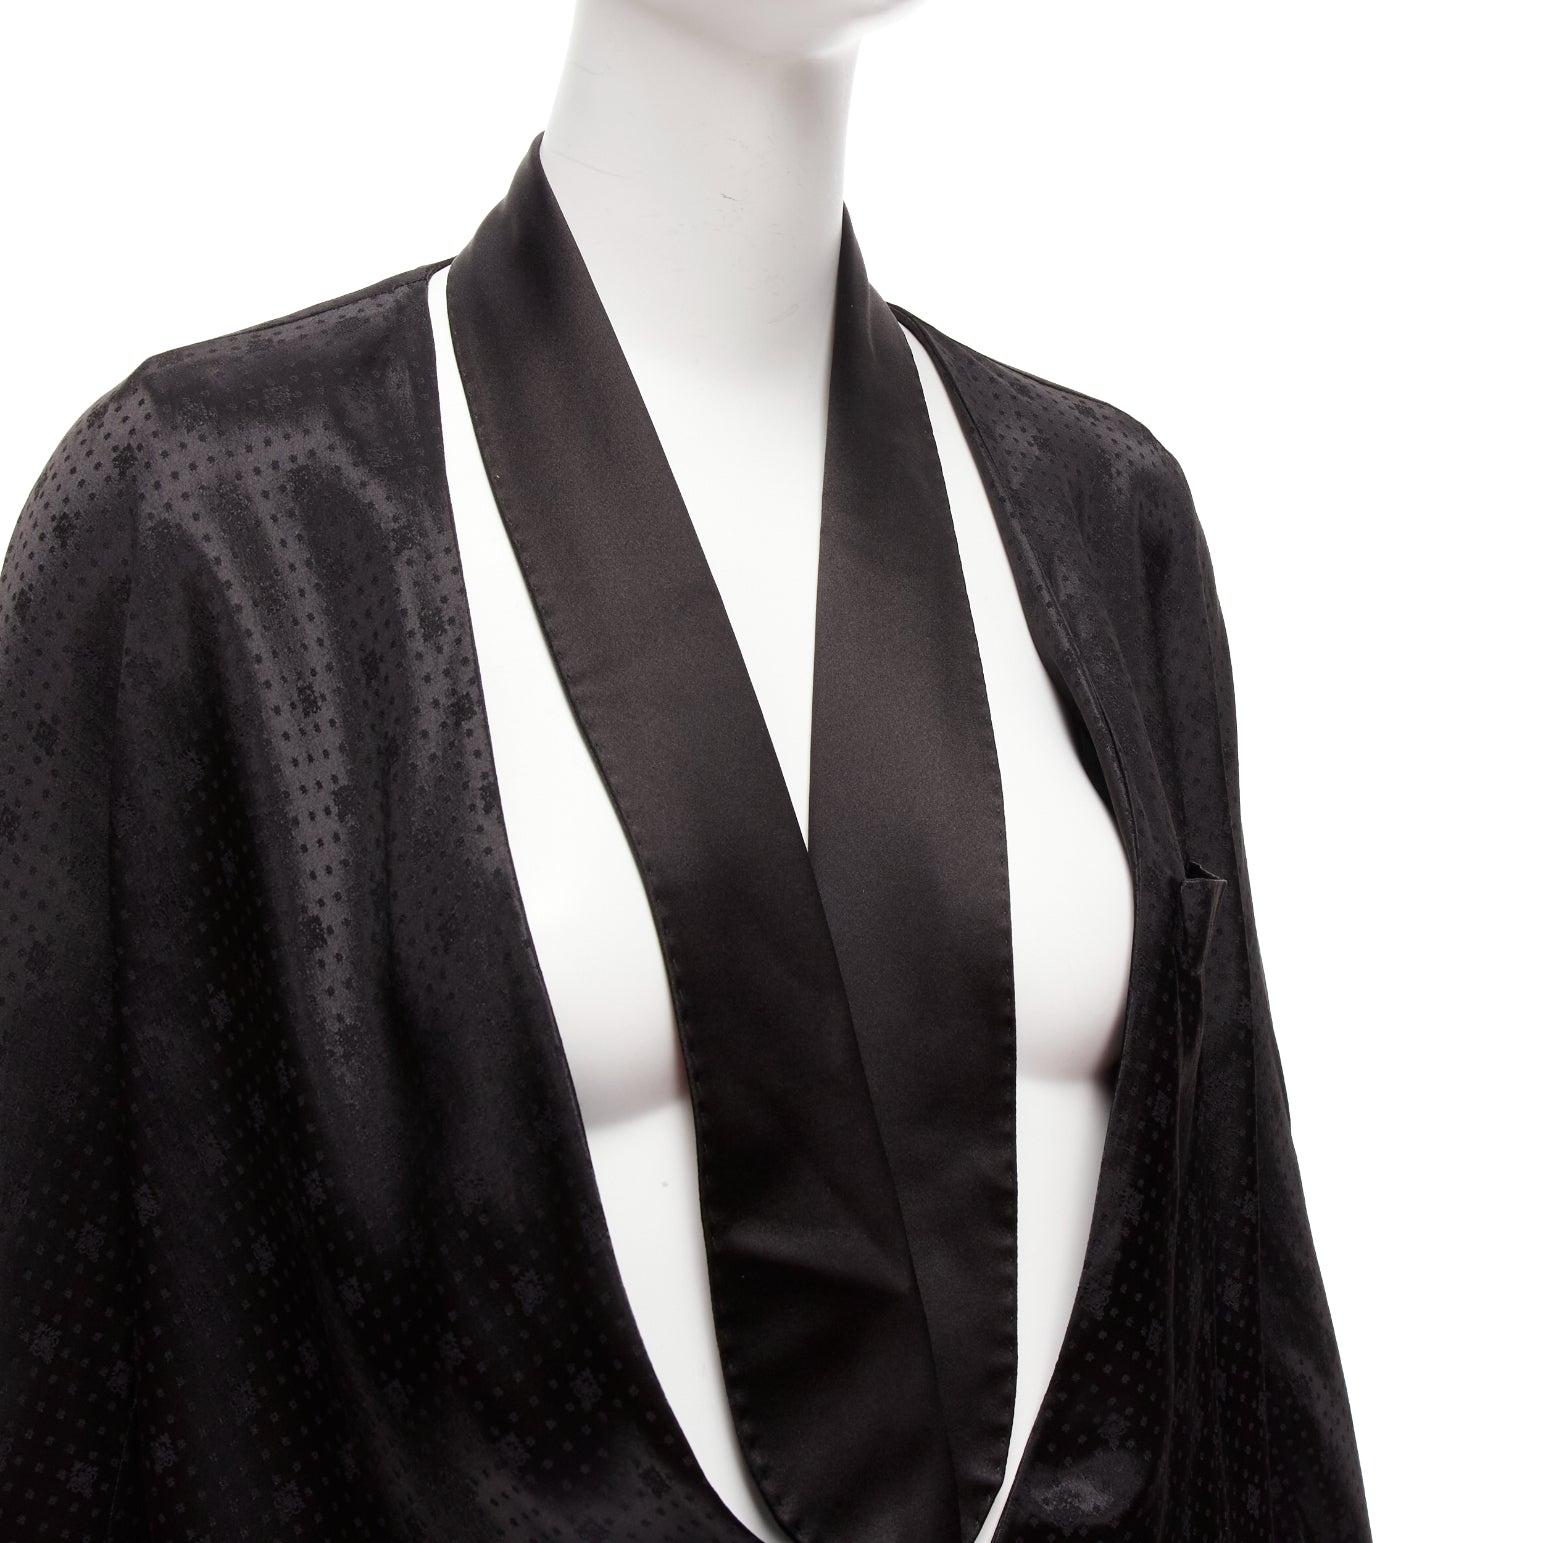 GIVENCHY Riccardo Tisci viscose black cut out collar robe blazer FR38 M
Reference: KEDG/A00326
Brand: Givenchy
Designer: Riccardo Tisci
Material: Viscose, Blend
Color: Black
Pattern: Barocco
Closure: Magnet
Lining: Black Fabric
Extra Details: Cross